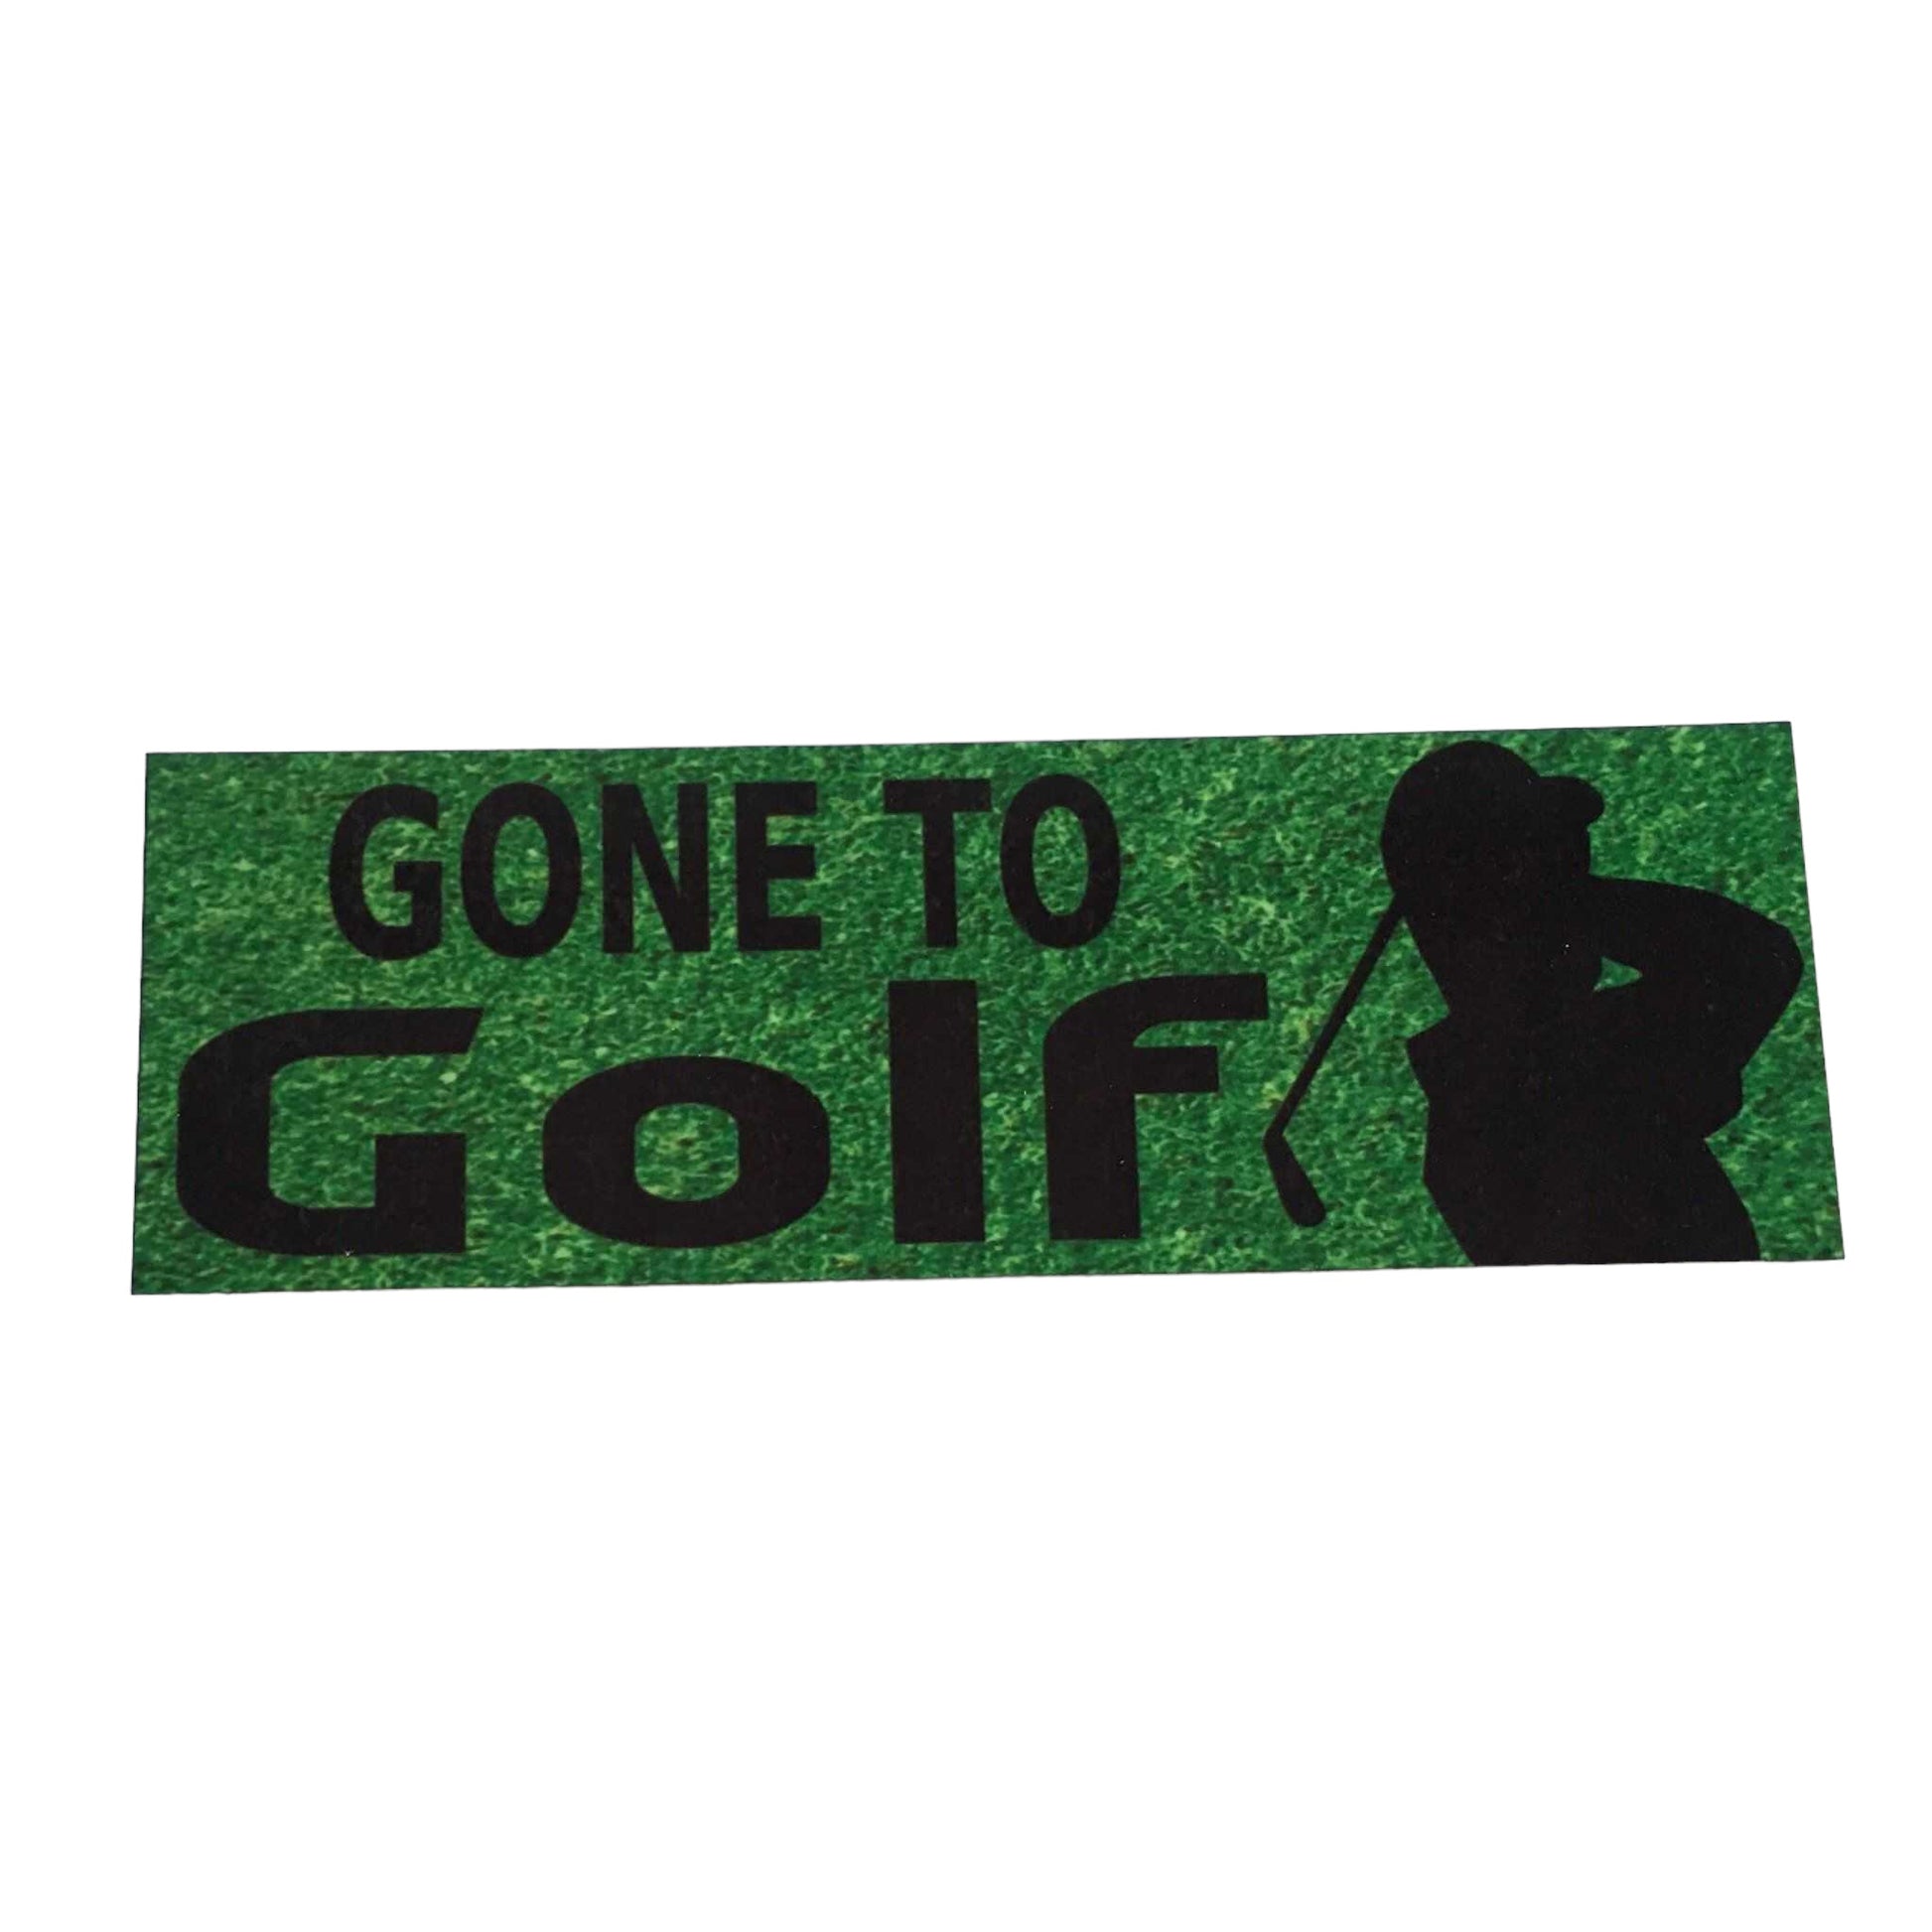 Gone To Golf Green Sign - The Renmy Store Homewares & Gifts 